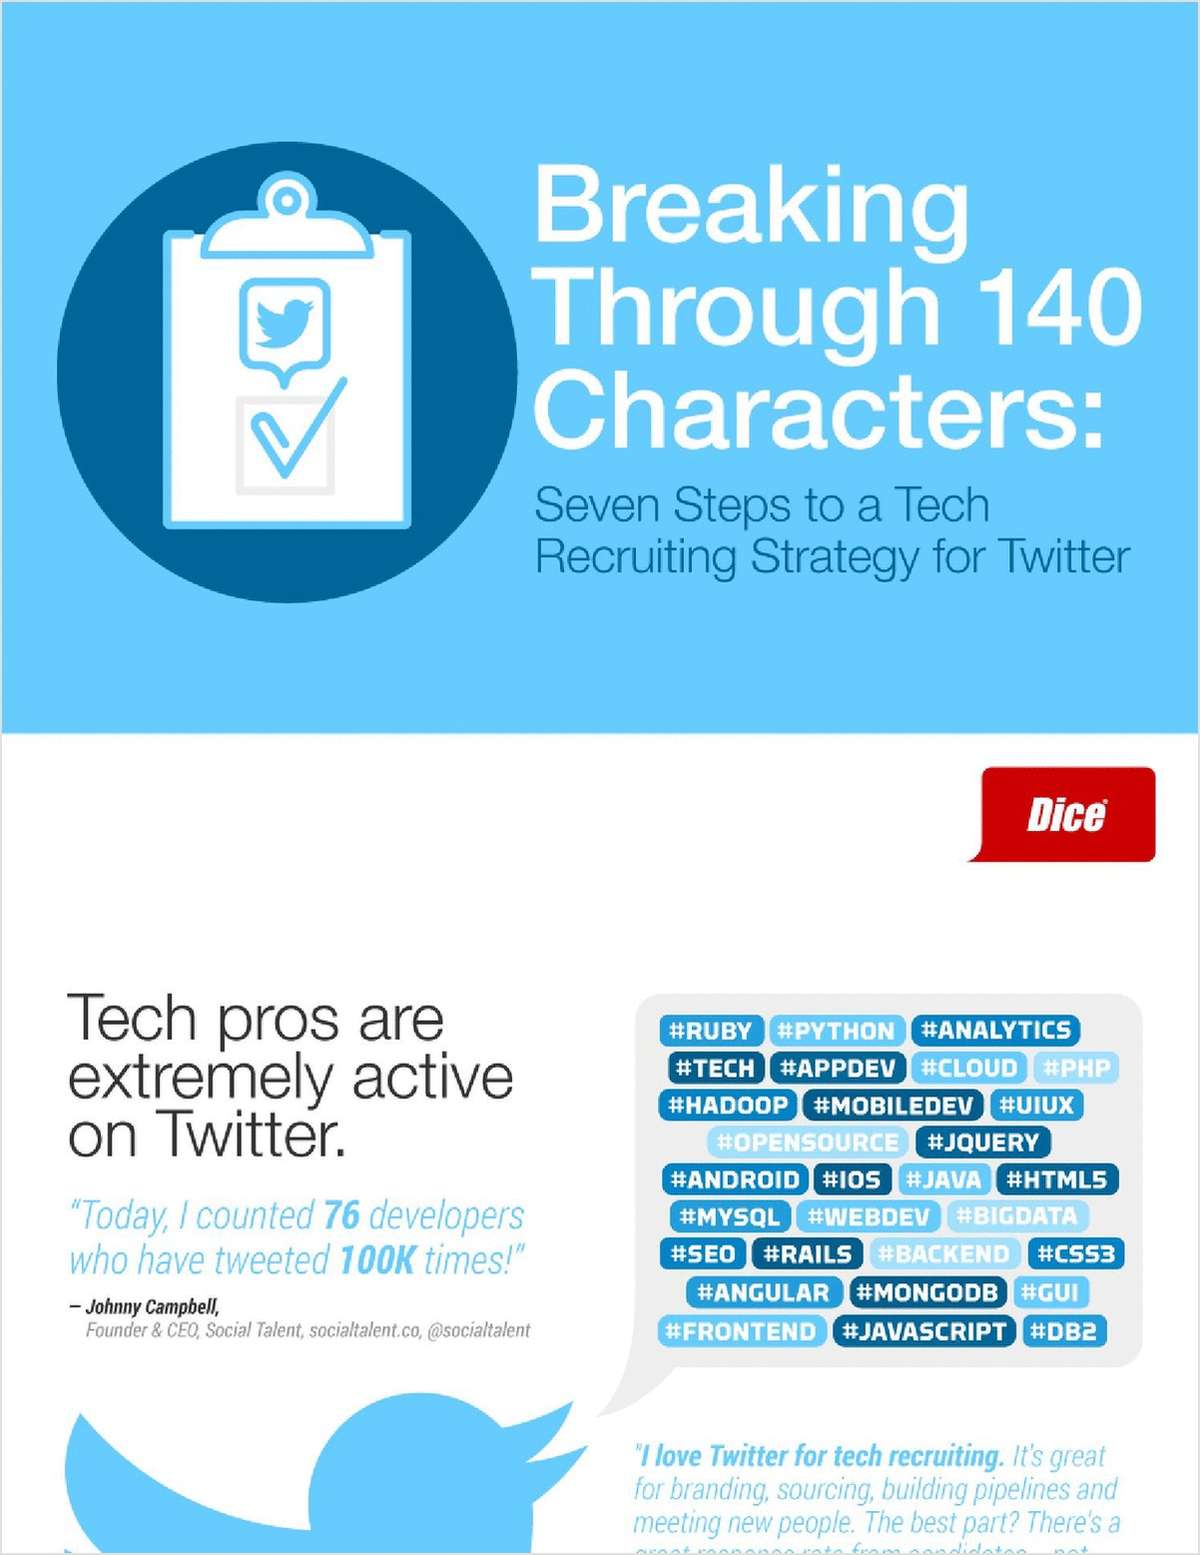 7 Steps to a Tech Recruiting Strategy for Twitter